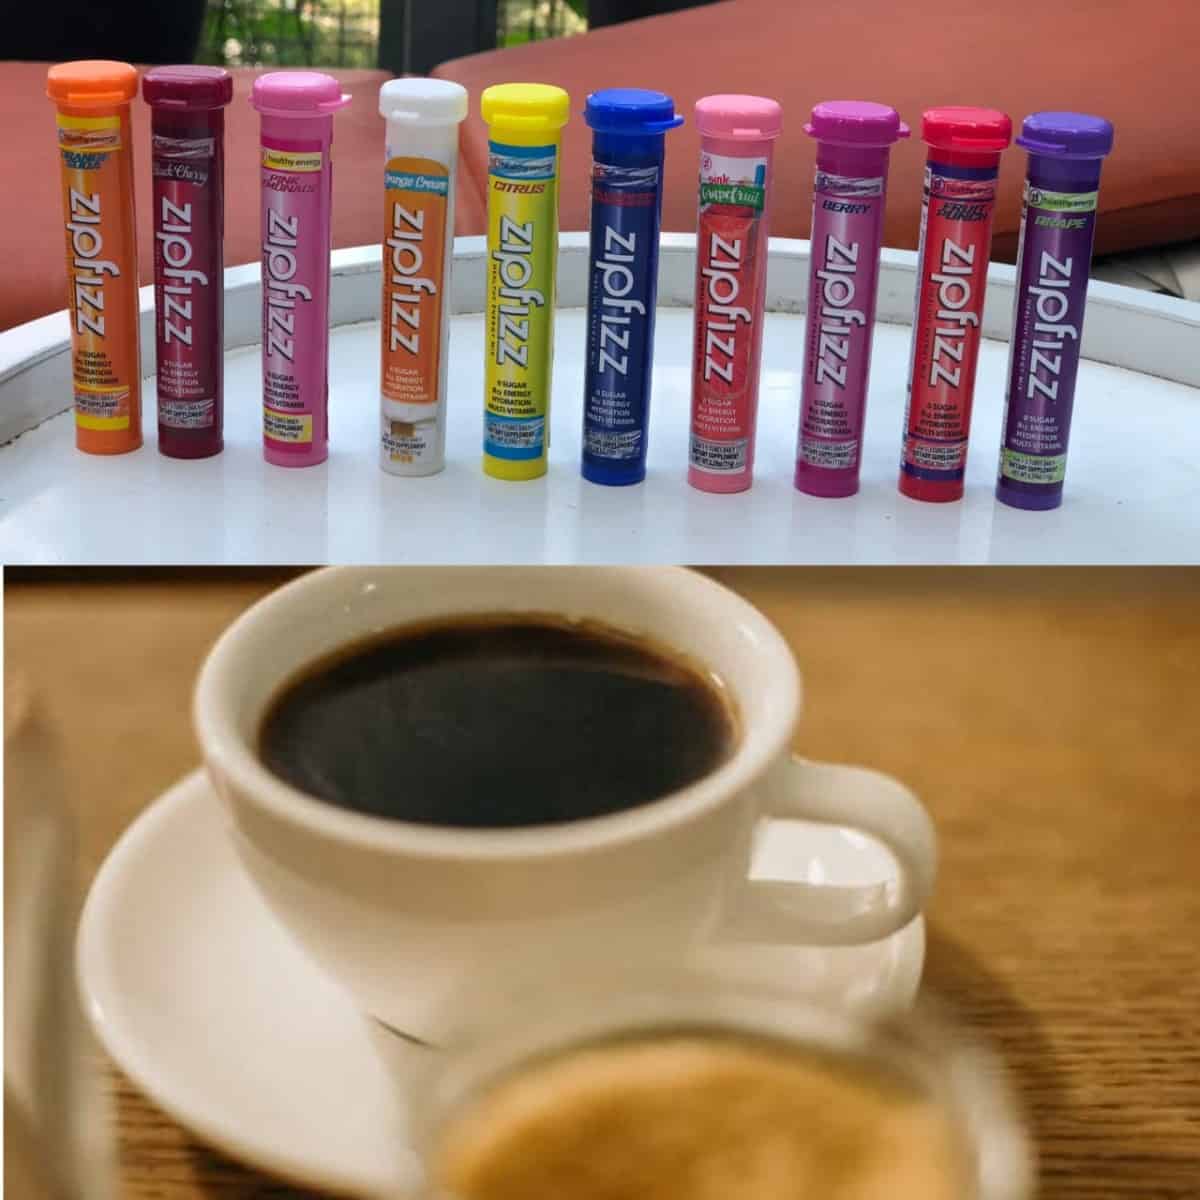 An image showing both Zipfizz and coffee